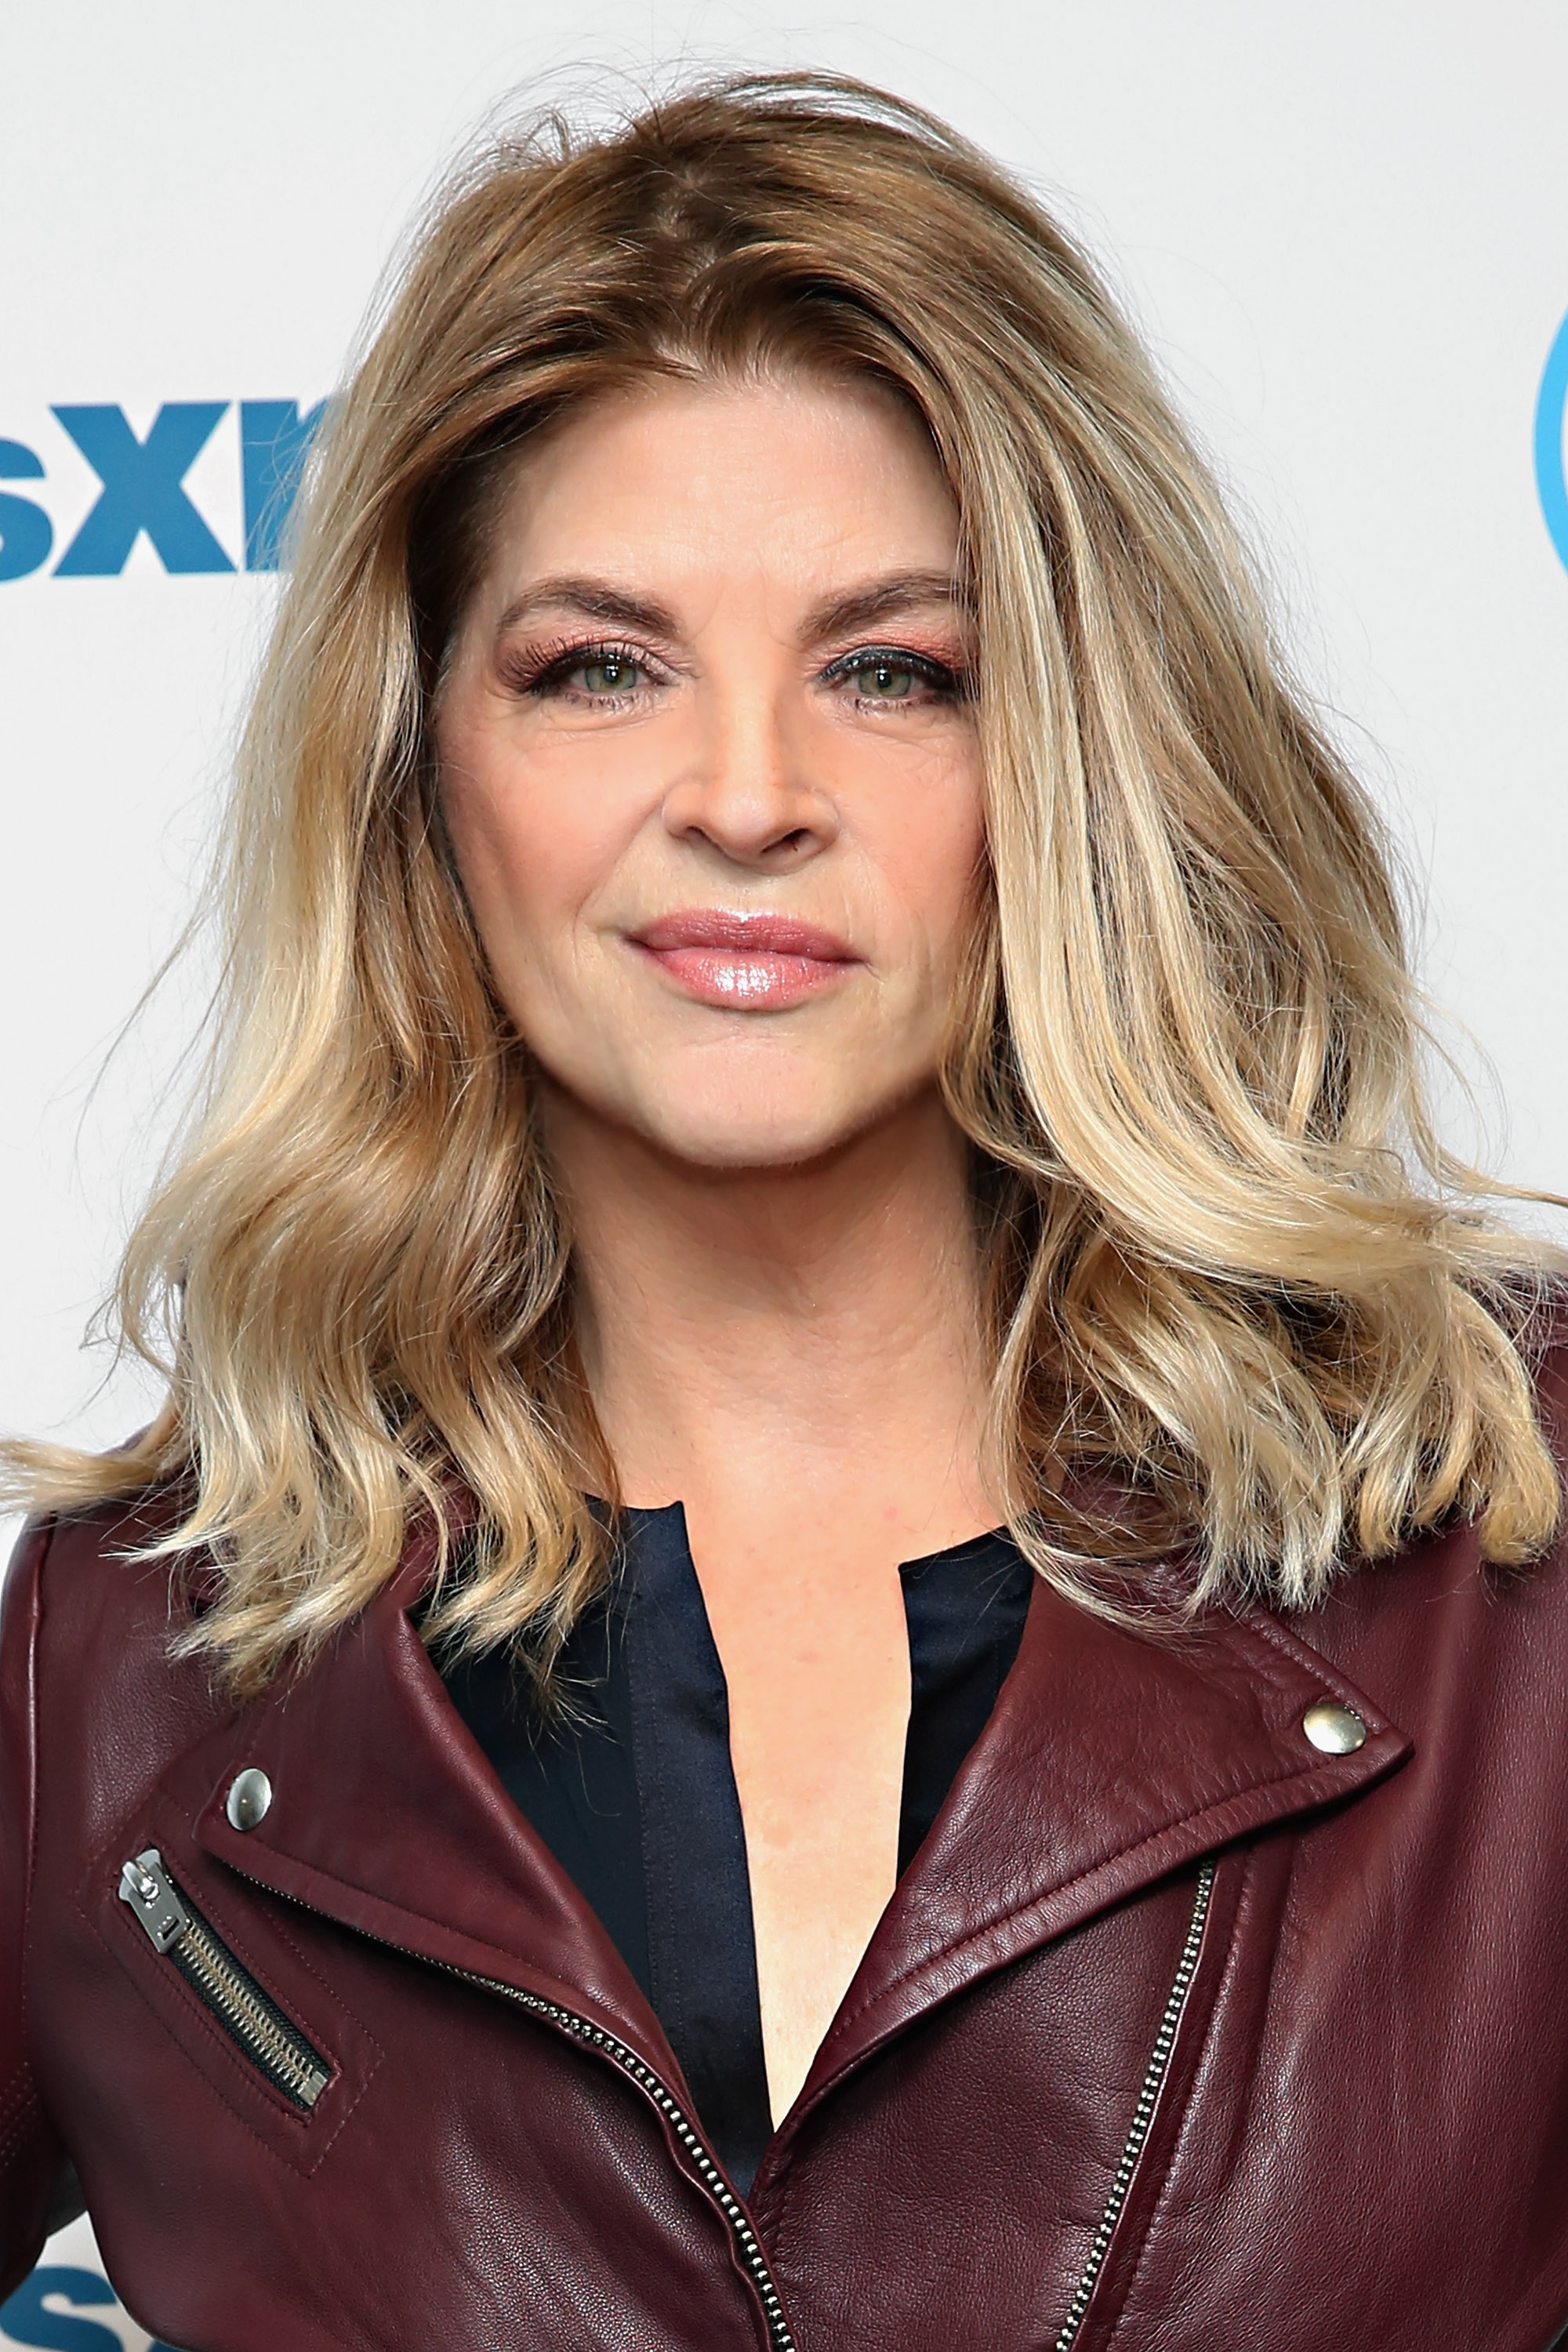 Kirstie Alley Shares the Qualities She's Looking For in a ...